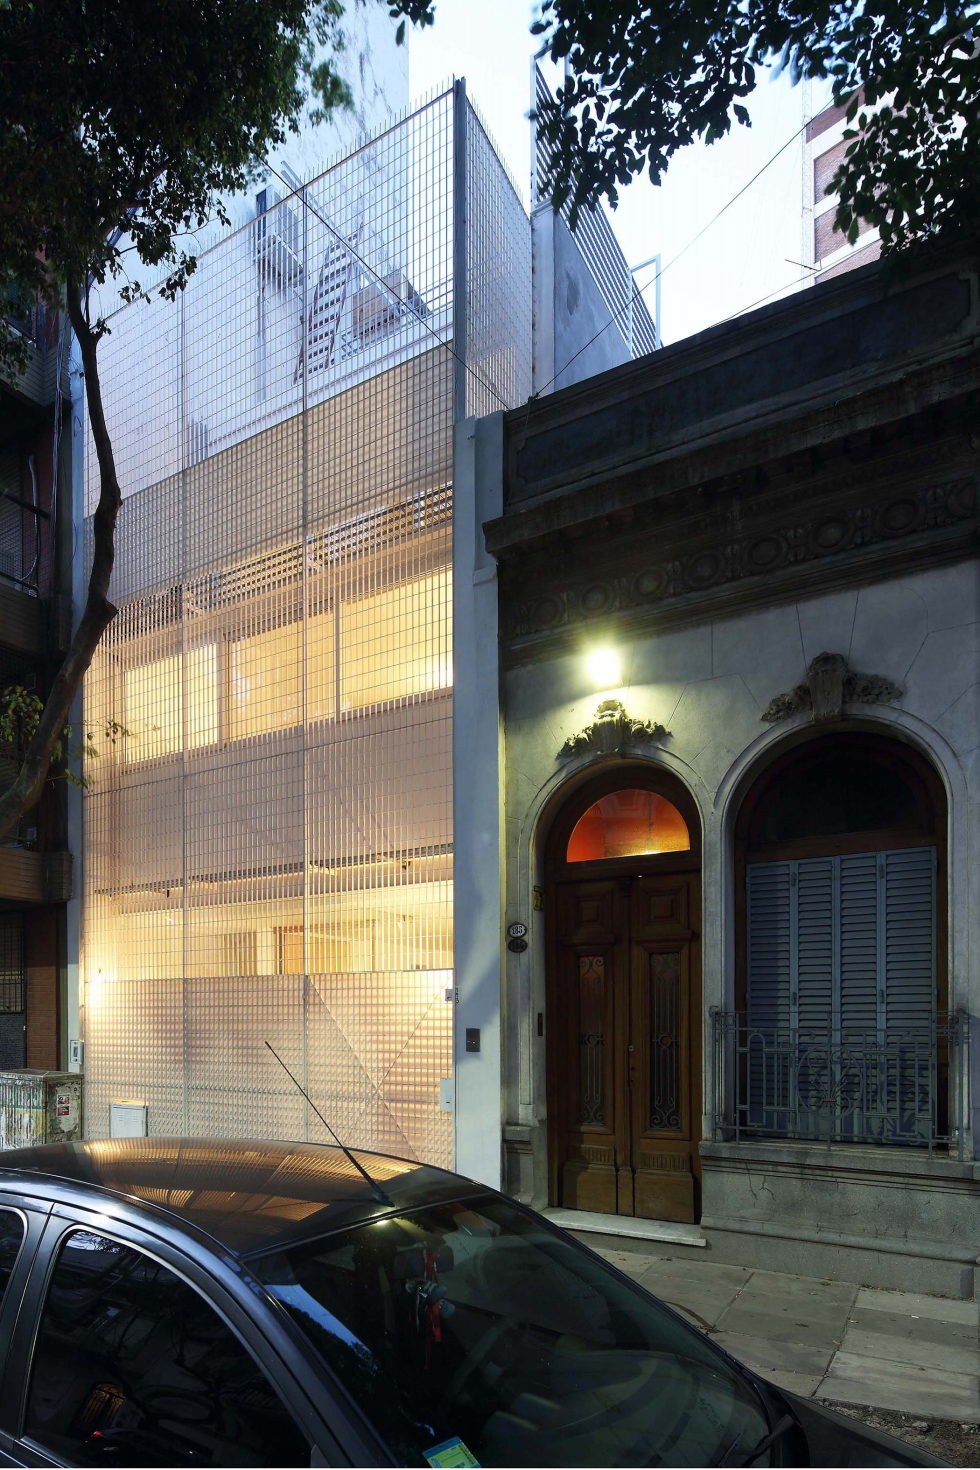 Jauretche House In Buenos Aires upon the project of Colle-Croce 4